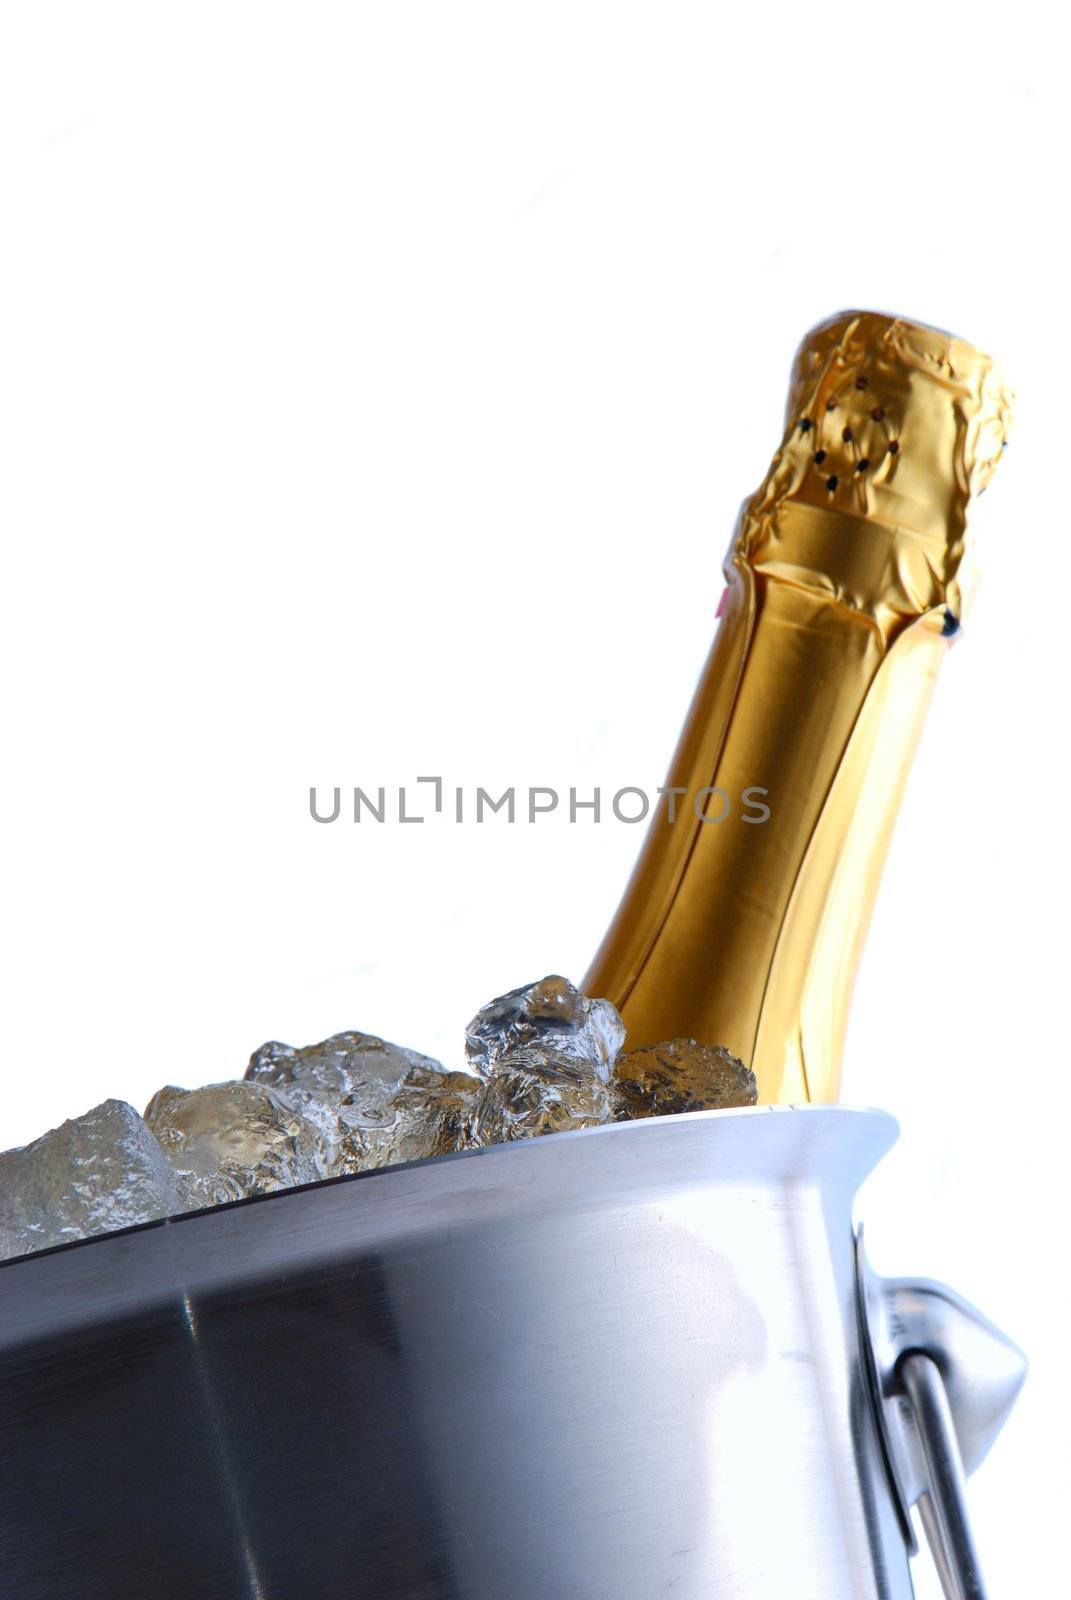 Champagne cooler by haveseen